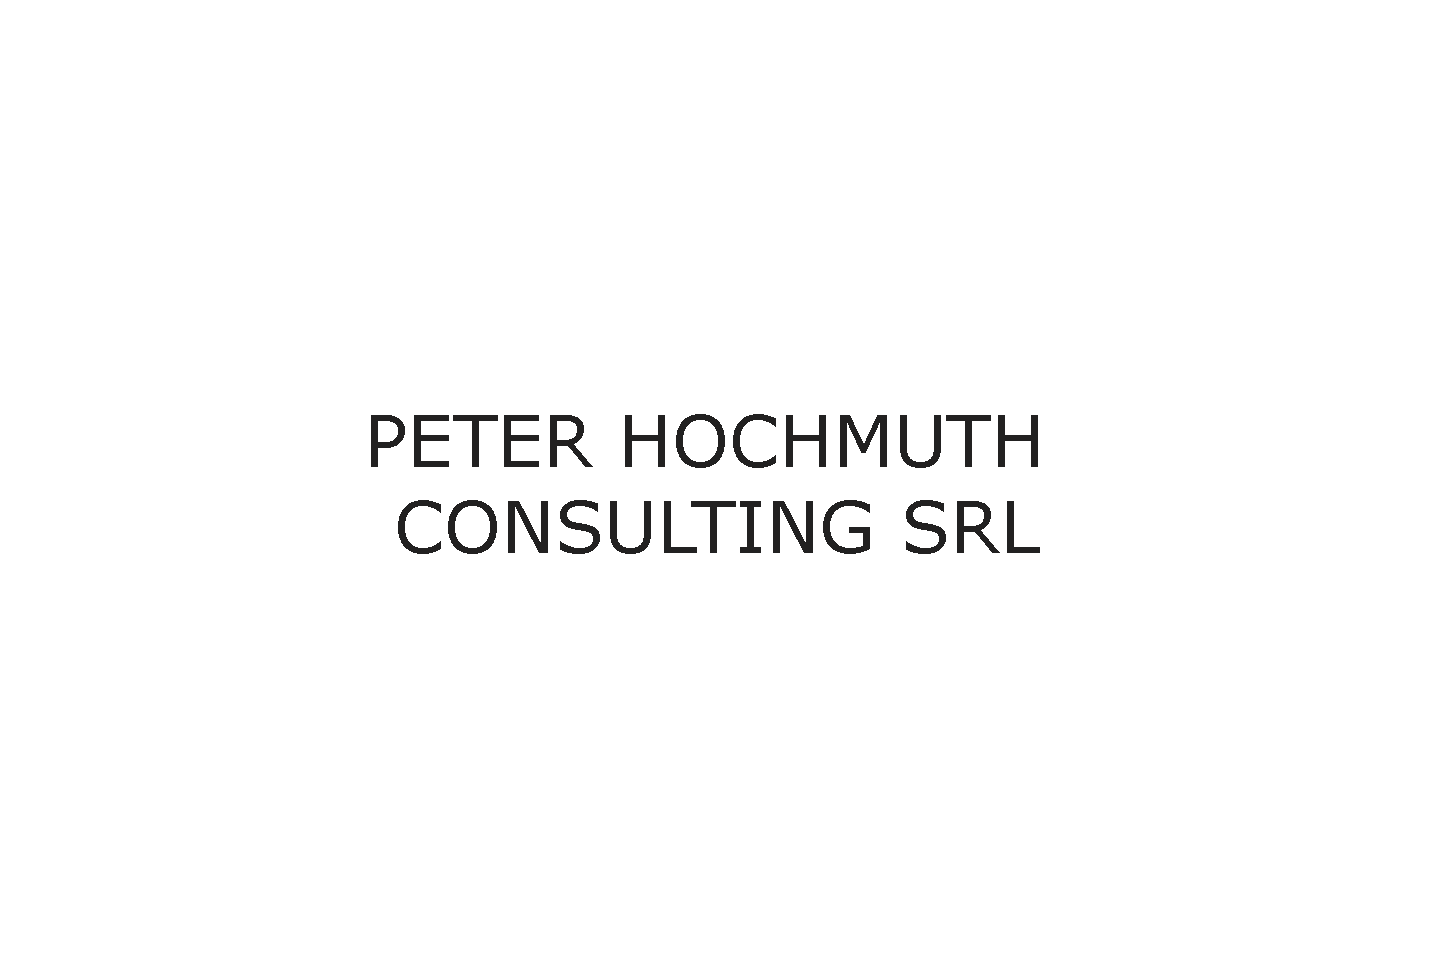 PETER HOCHMUTH CONSULTING SRL